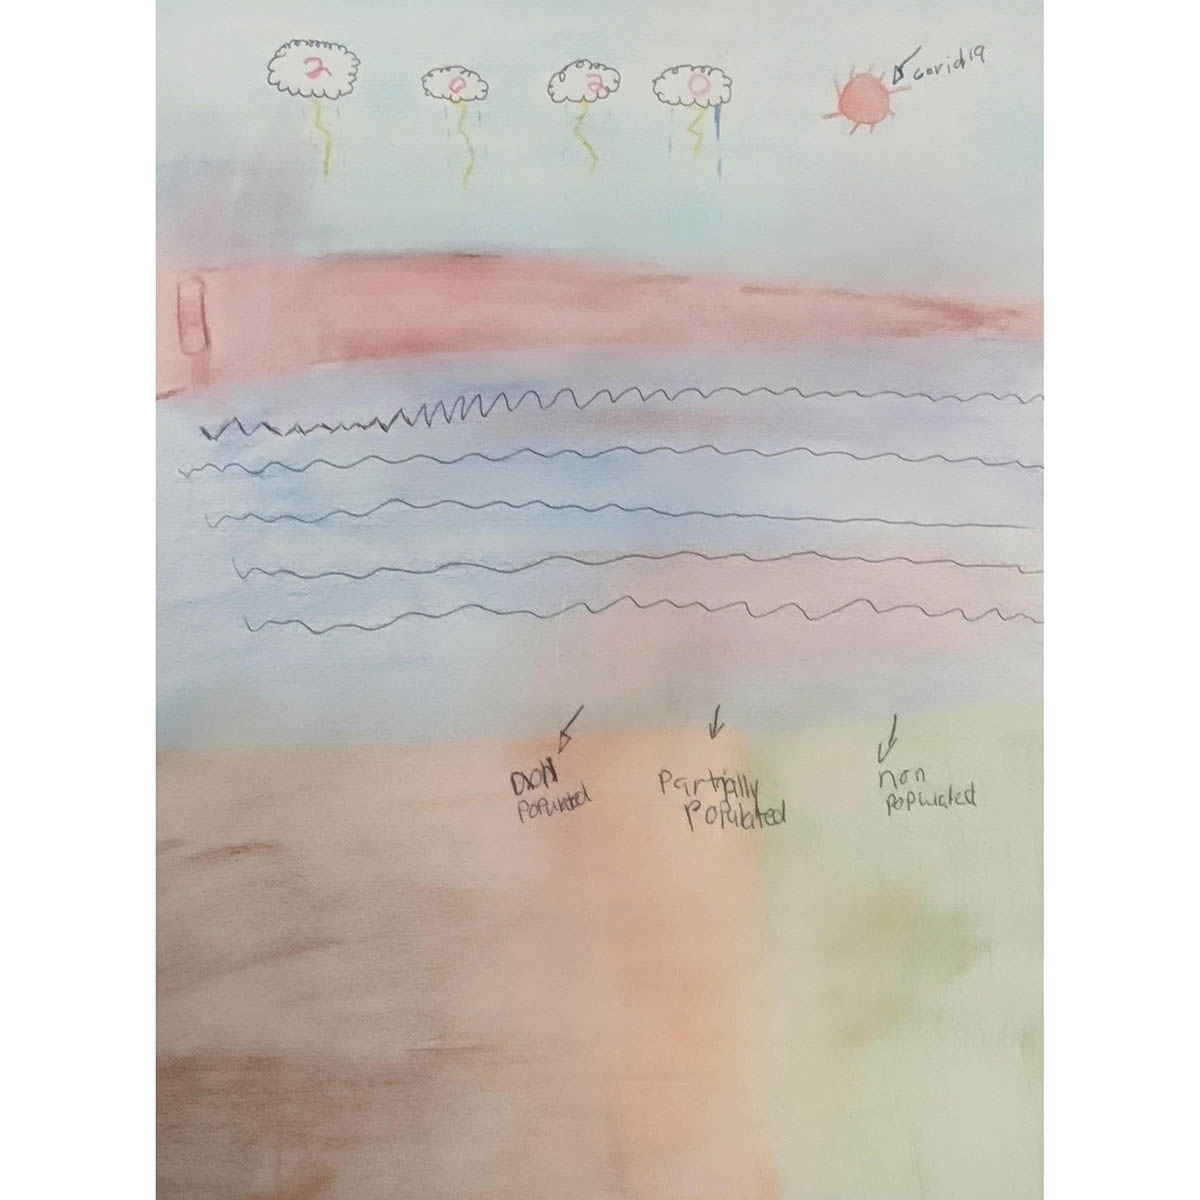 Submitted by Mary Farrell, grade 1, region 2